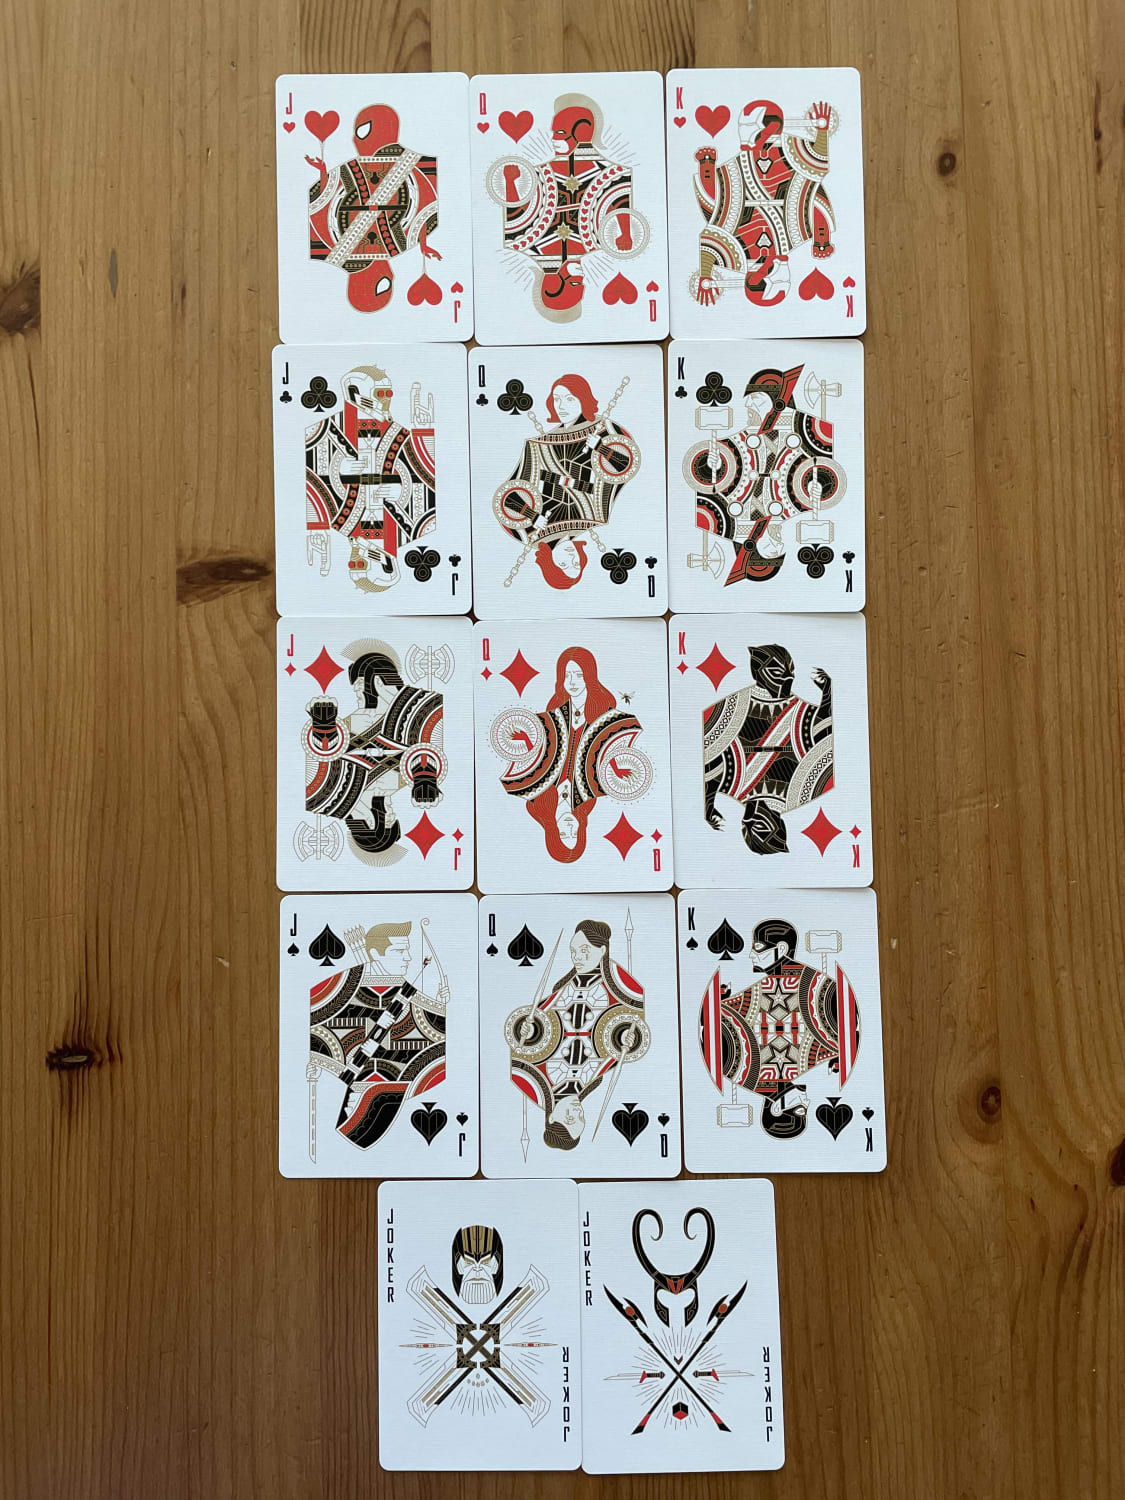 The art on this set of Avengers playing cards - made by Theory11